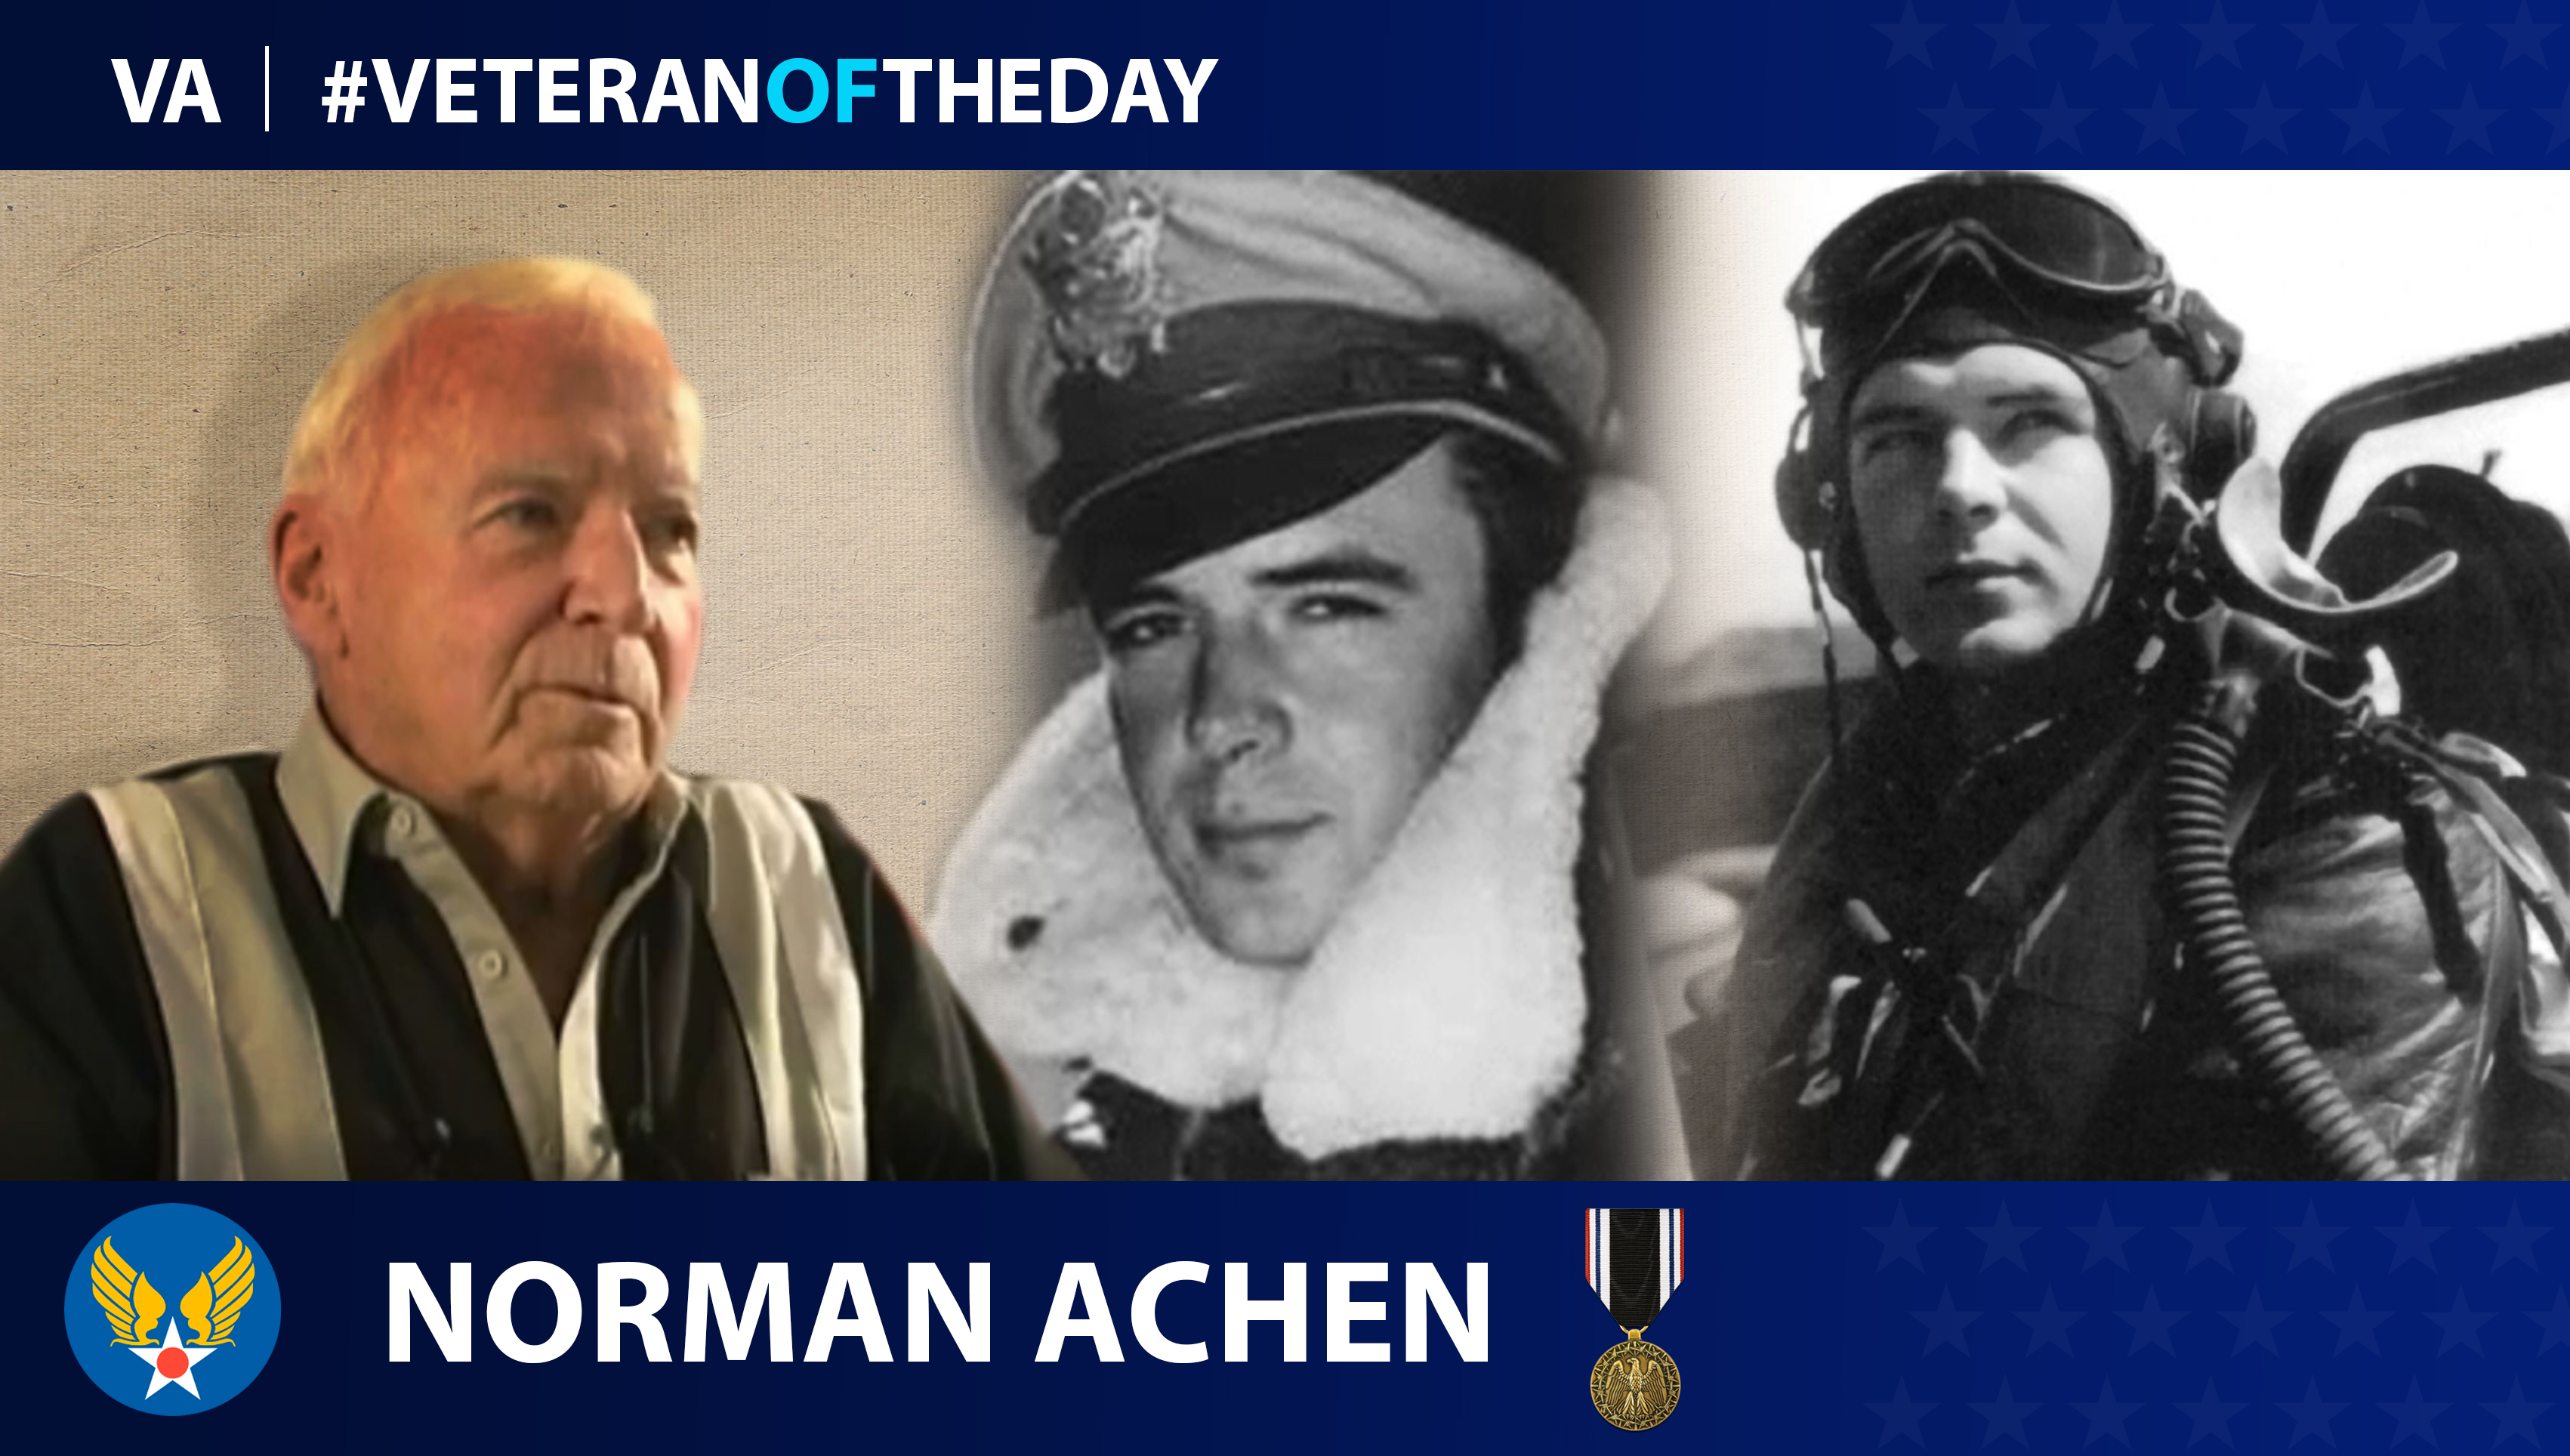 Norman Achen is today's Veteran of the Day.